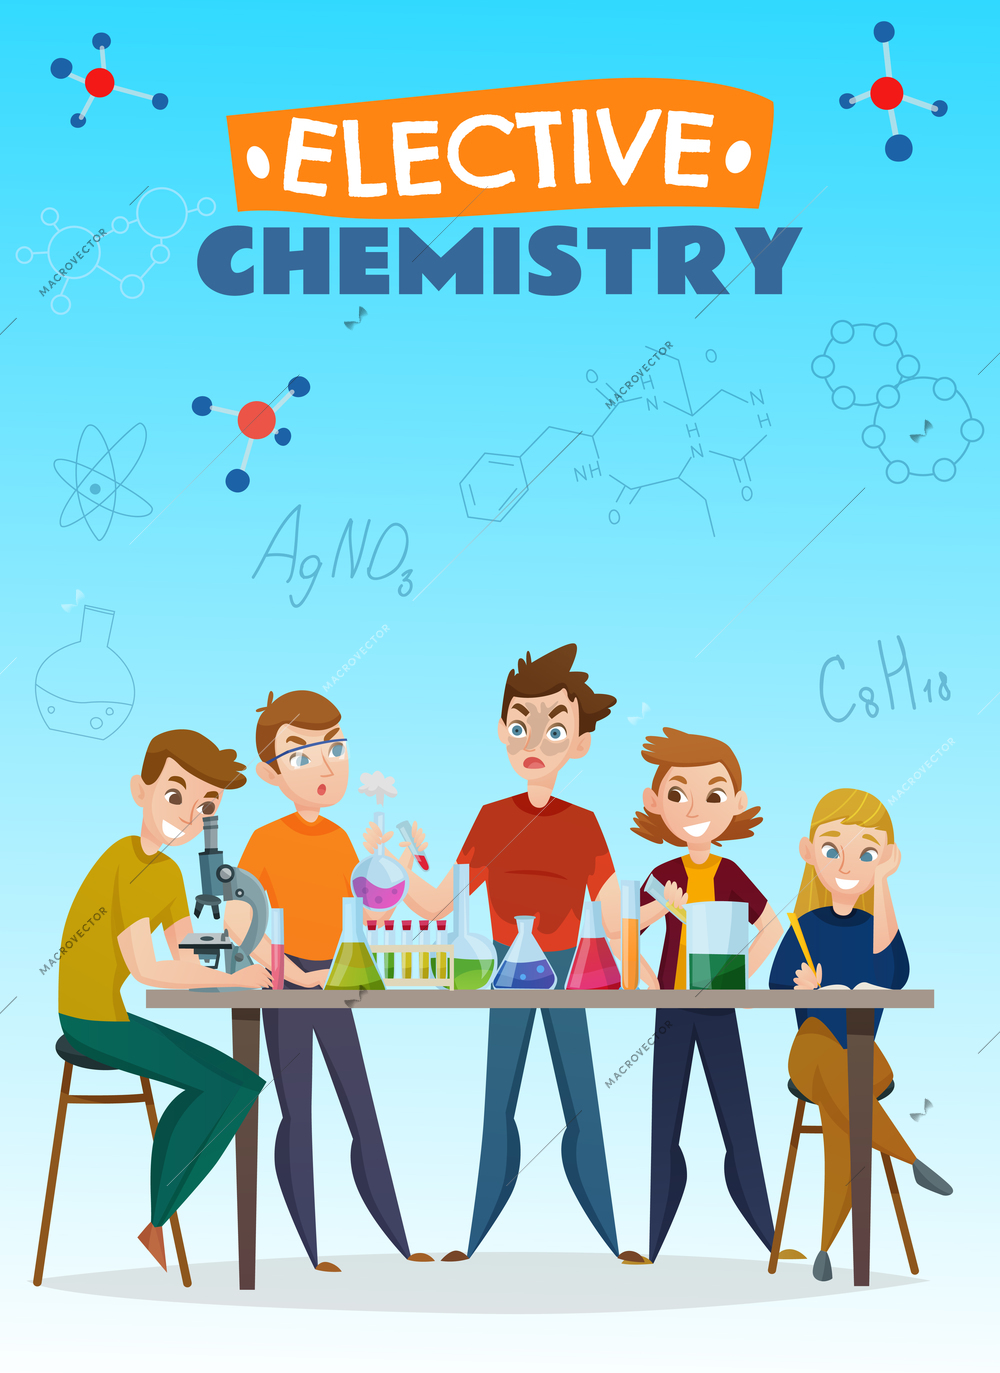 Elective chemistry cartoon poster, school students during lab experiment on blue background with formulas vector illustration